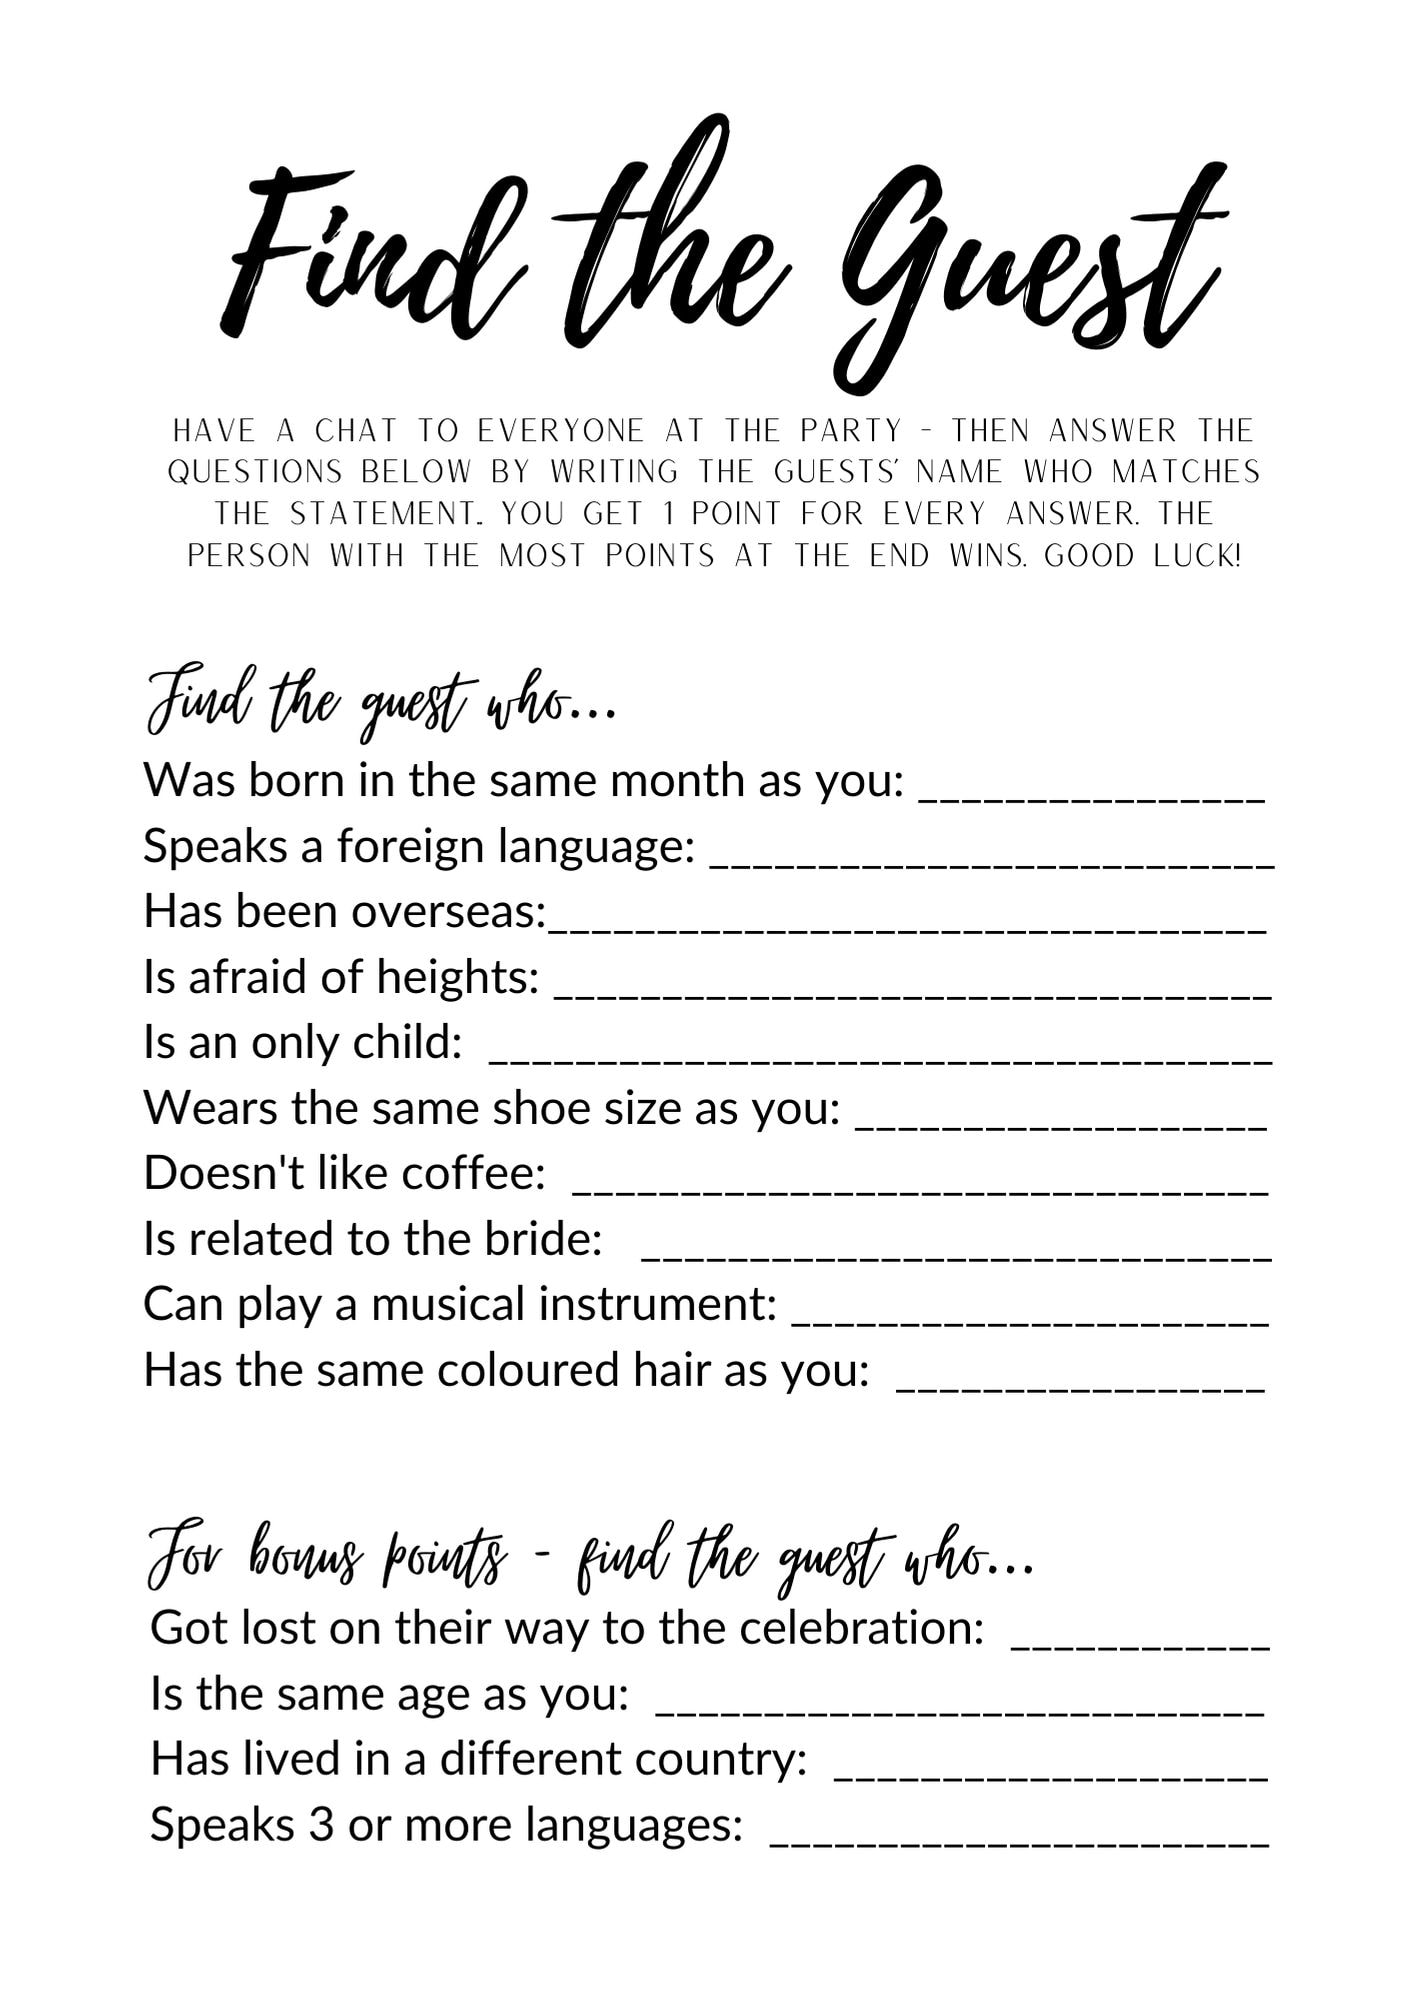 Find the Guest Game FREE Printable!